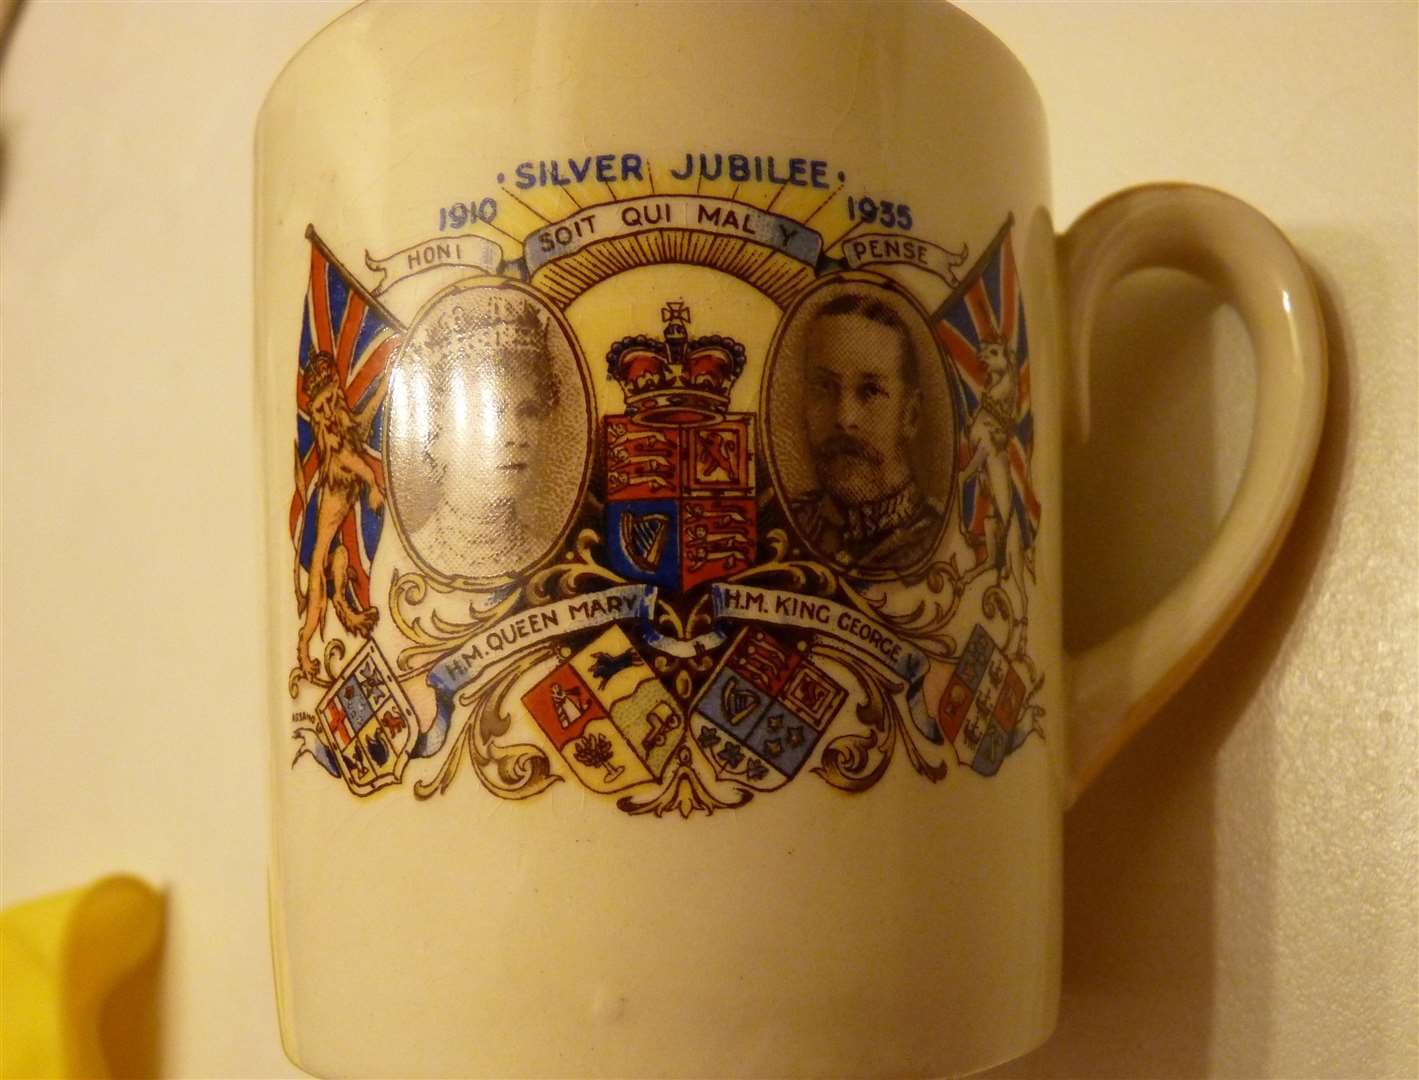 A small collection of silver jubilee mugs, like this one, remain in circulation. Picture credit: Bingham Heritage Trail Association.